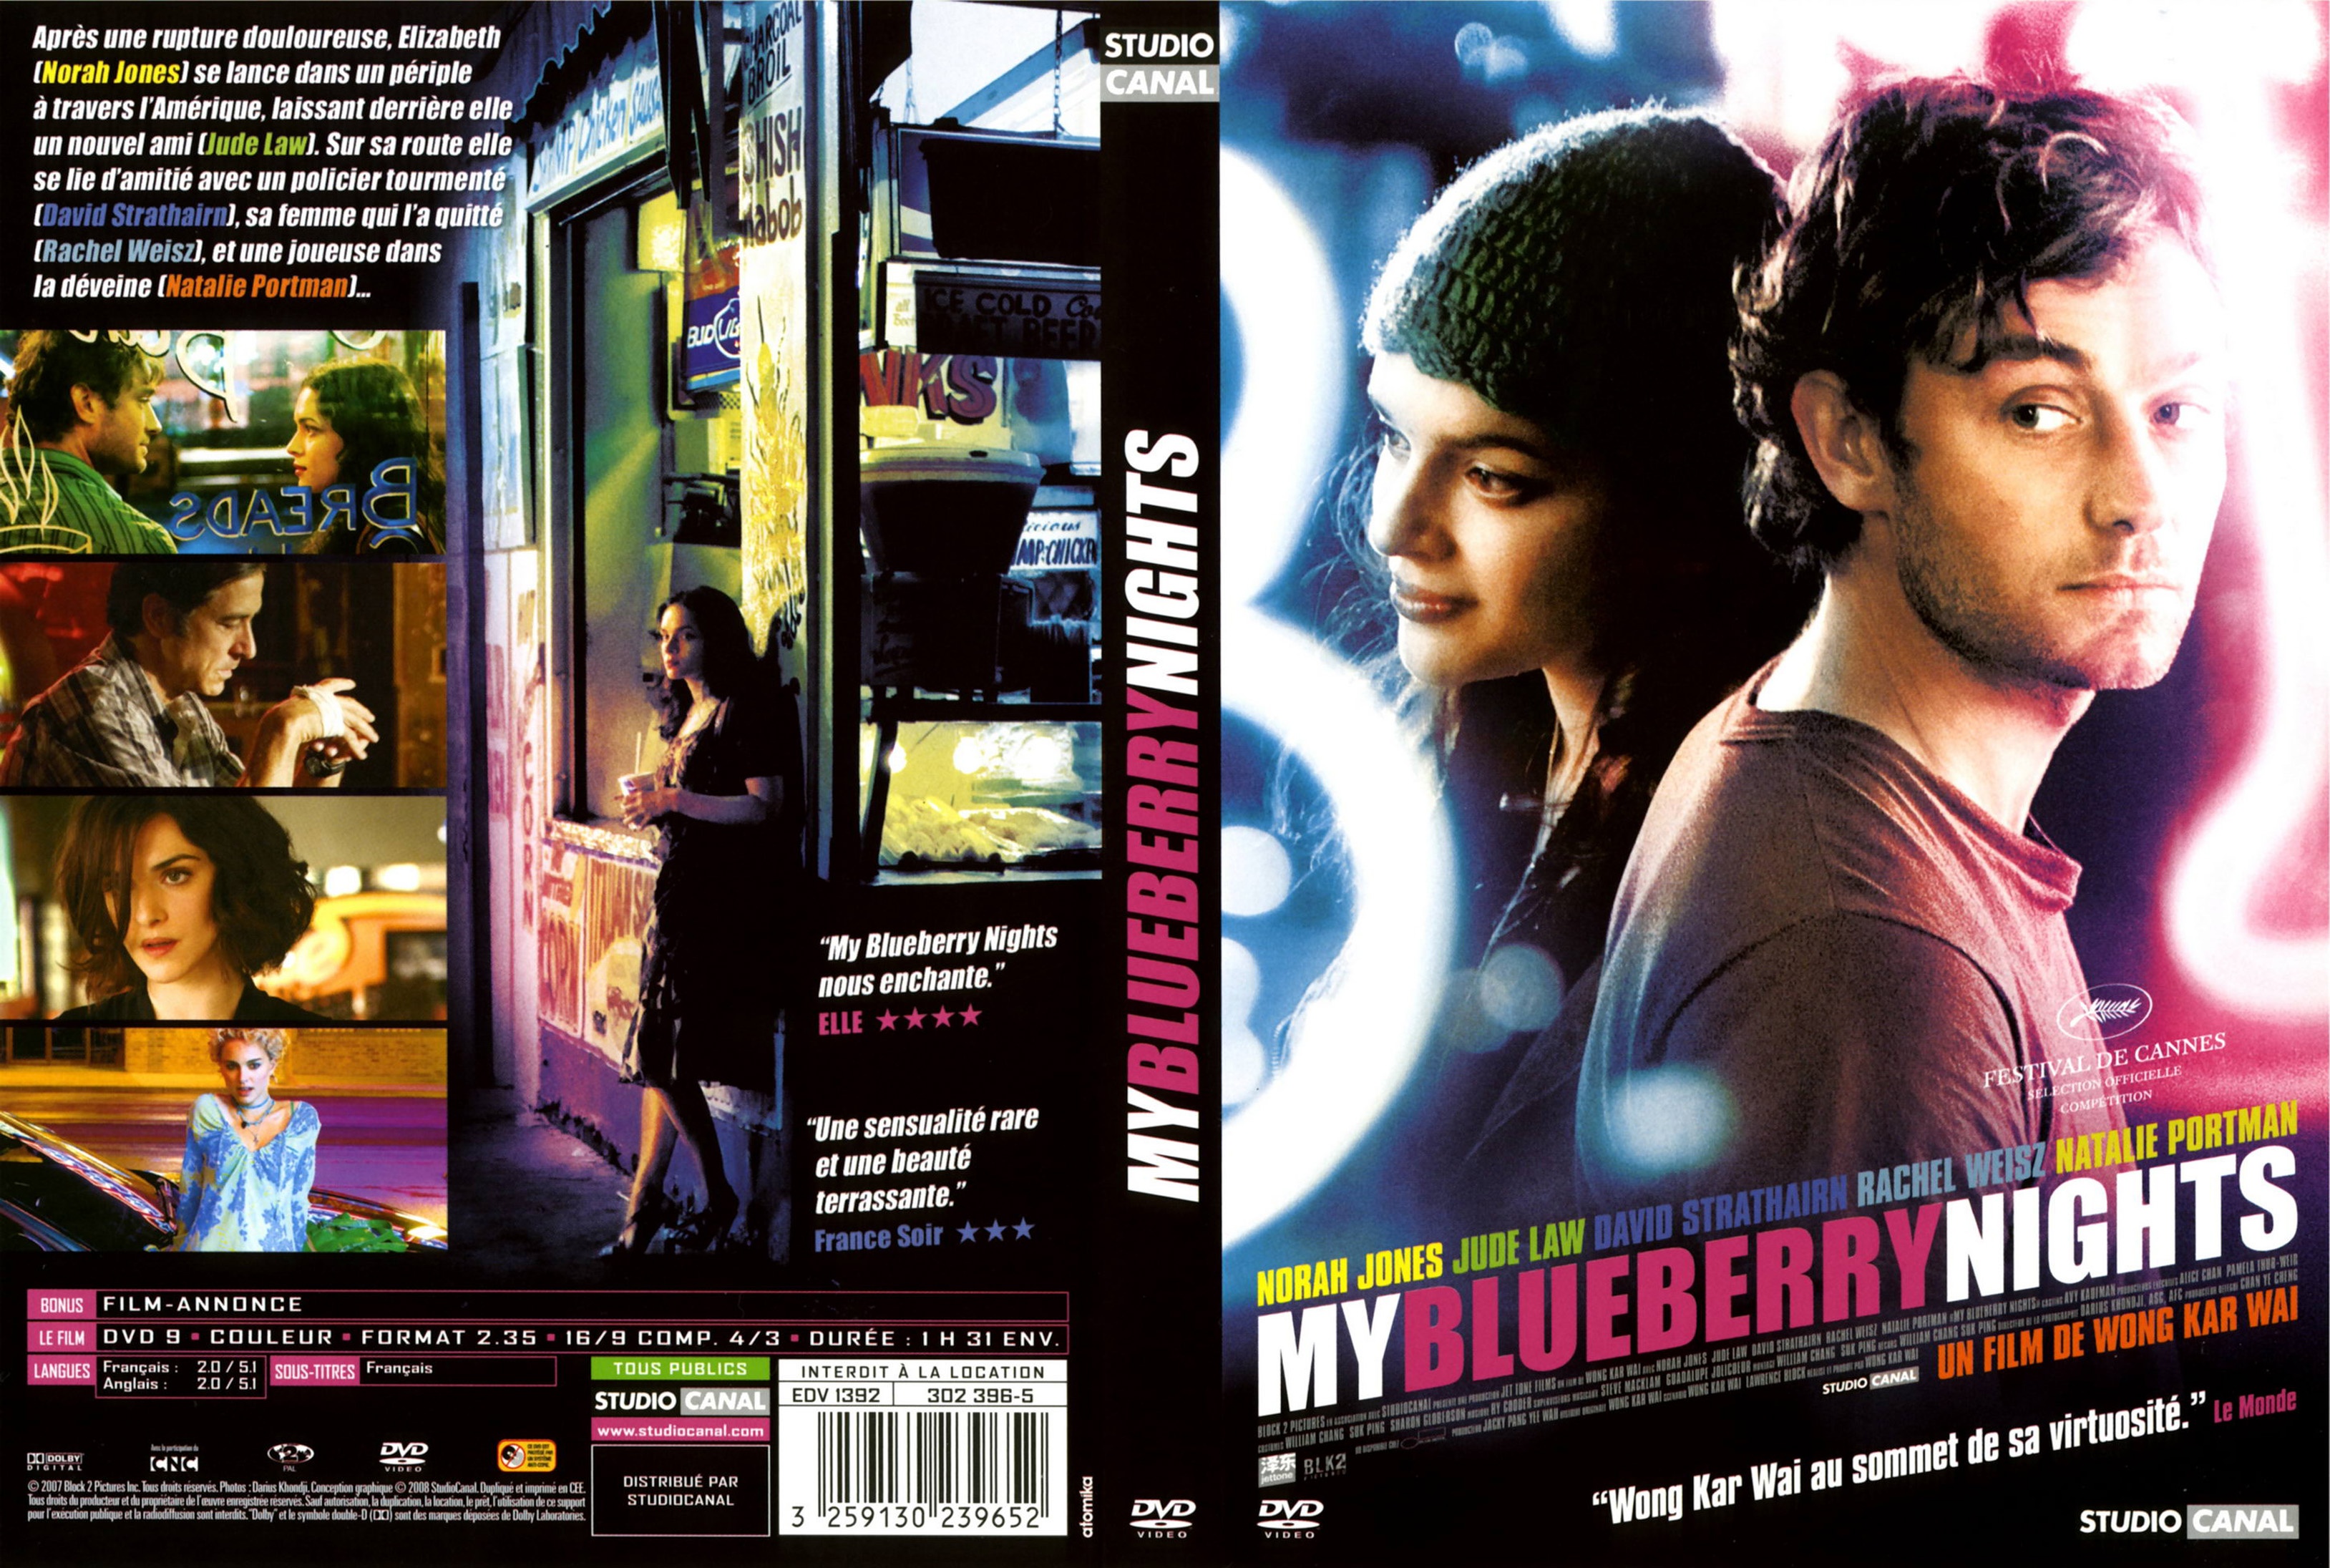 Jaquette DVD My blueberry nights v2